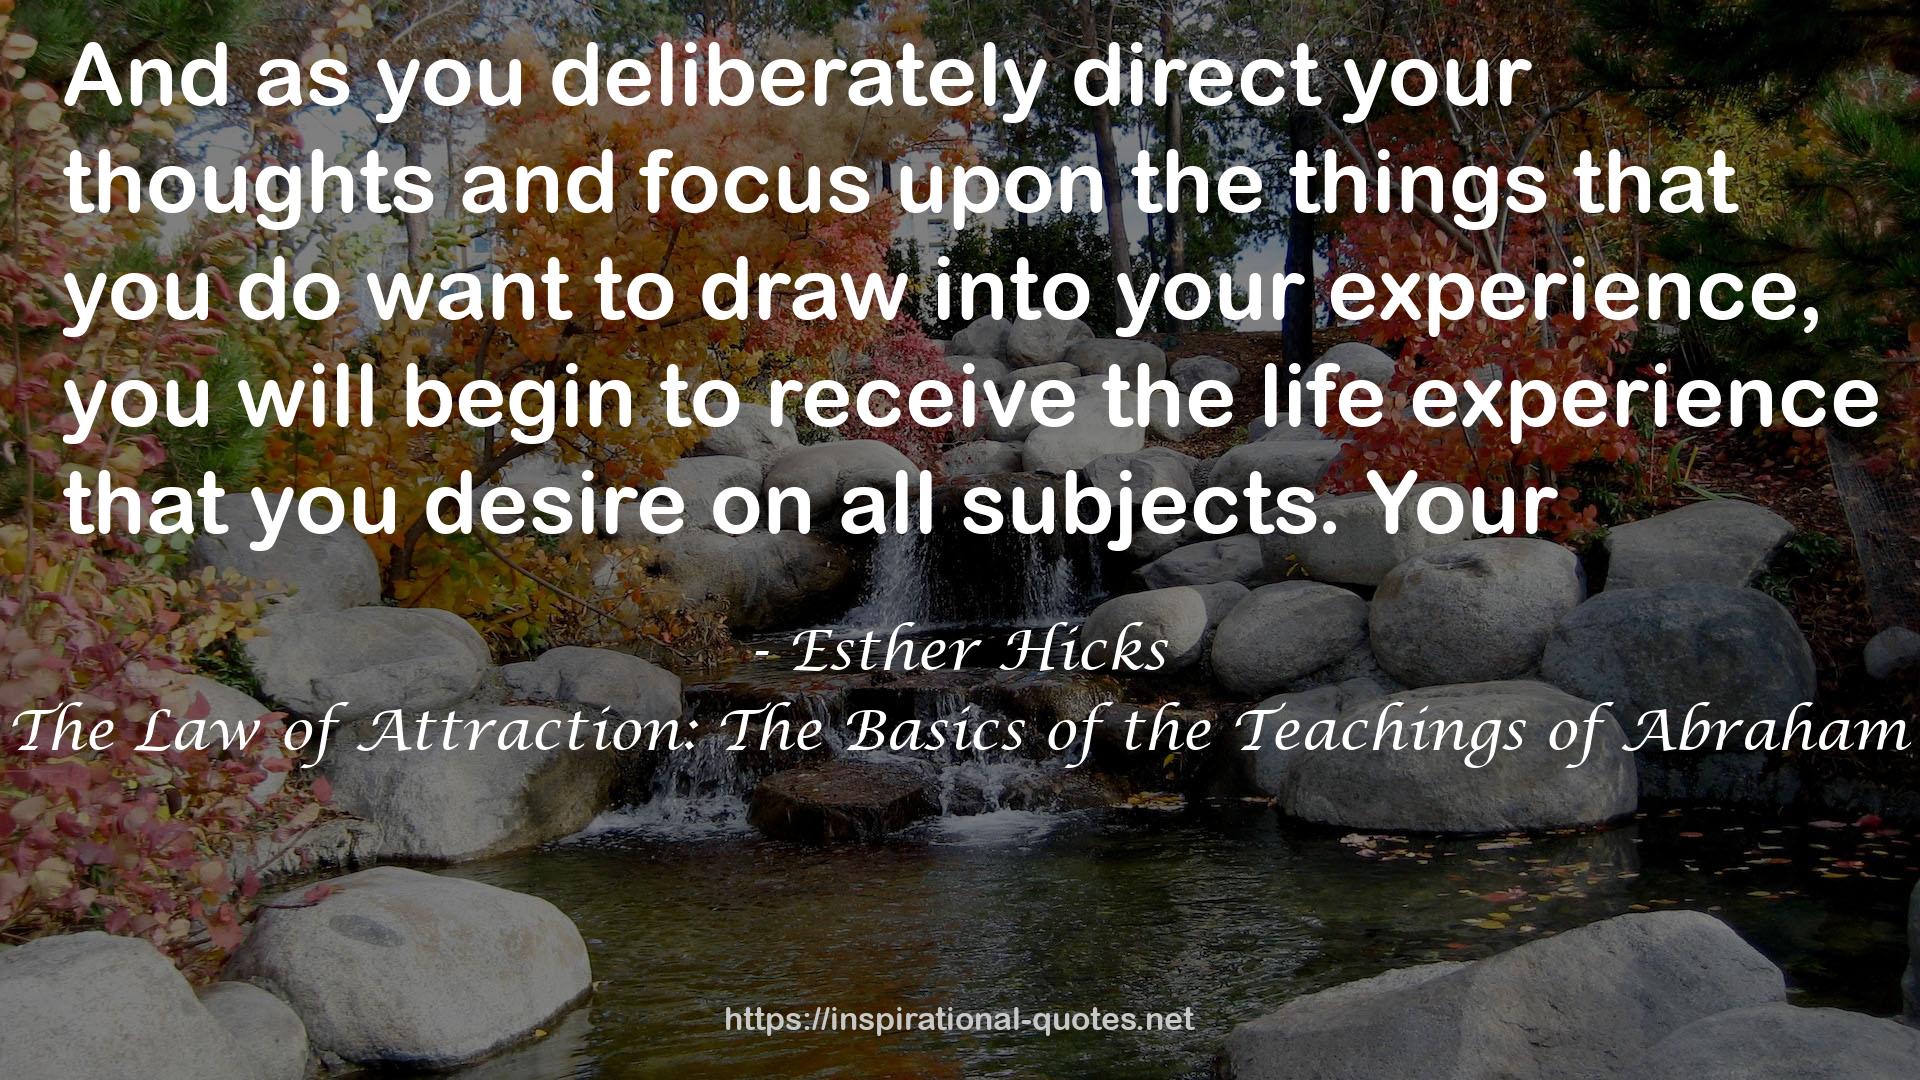 Esther Hicks QUOTES